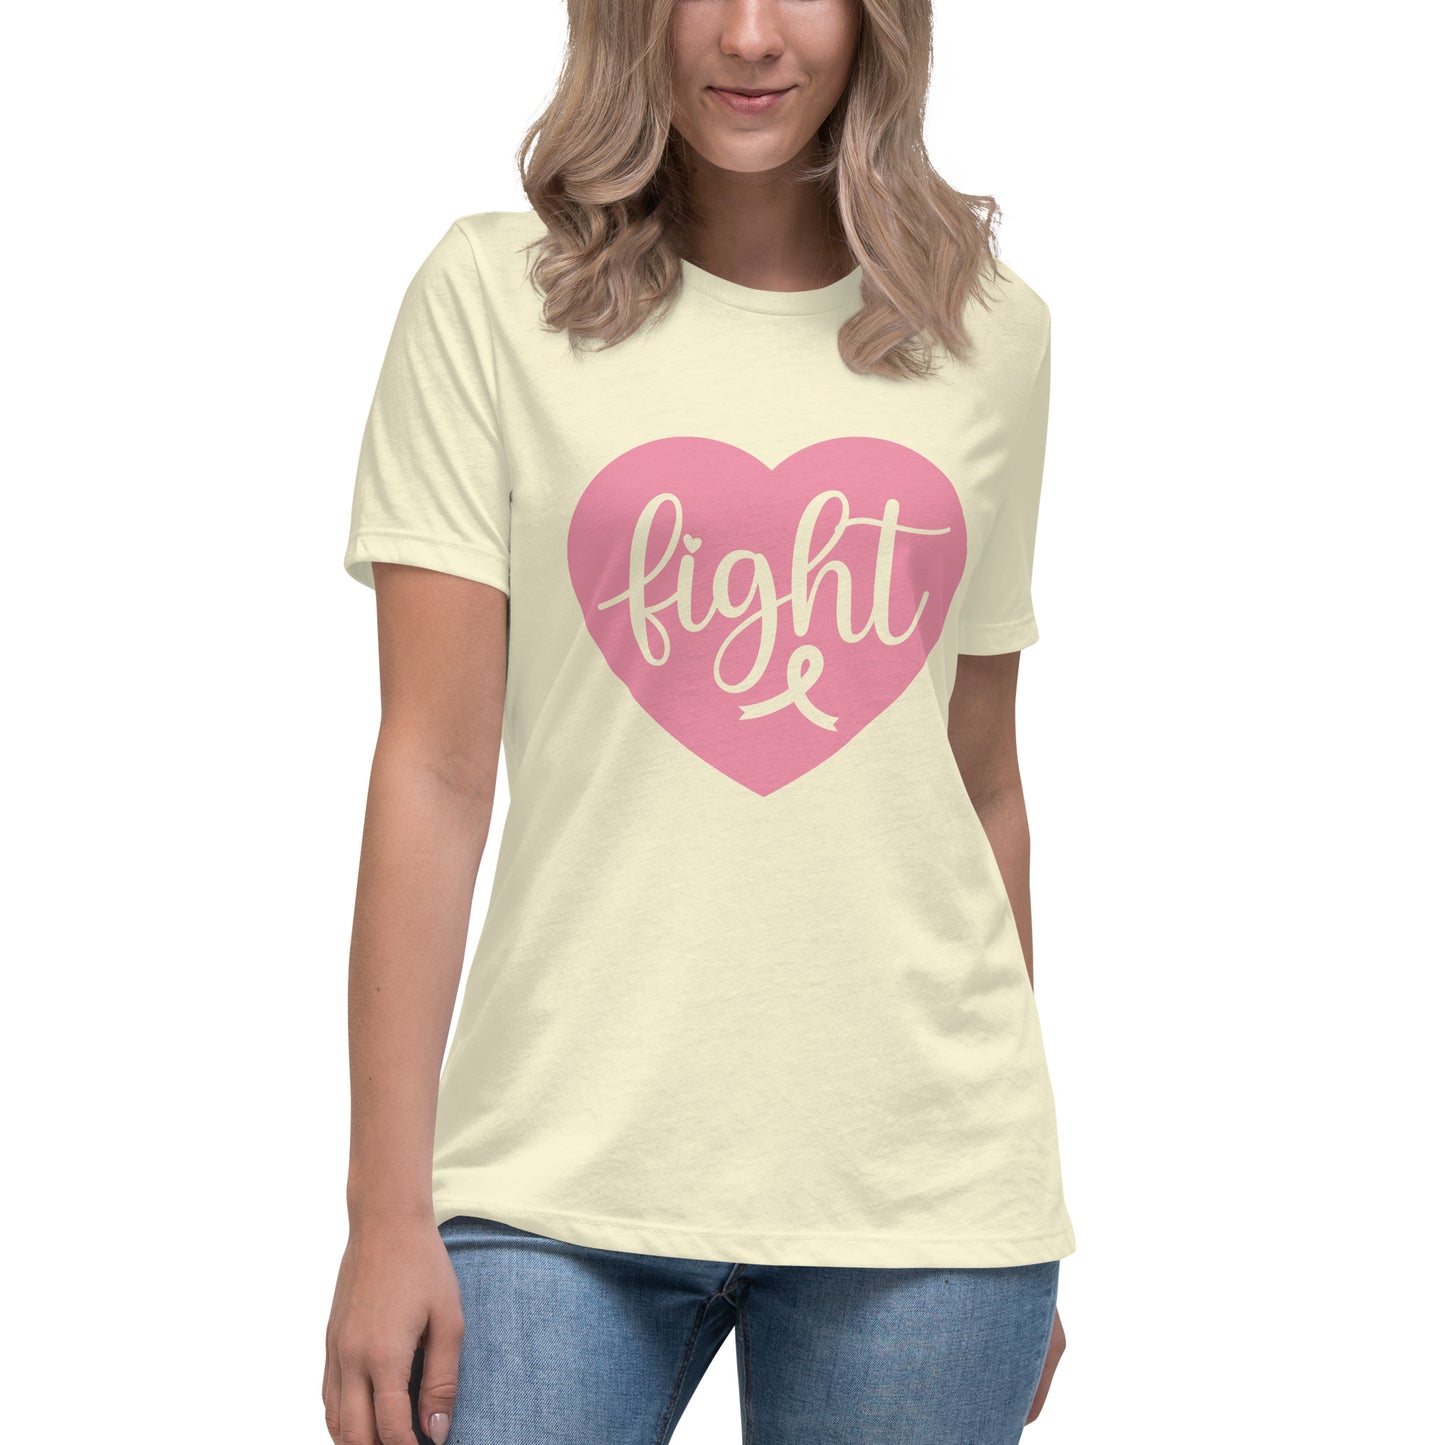 Fight Cancer Women's Relaxed T-Shirt Tee Tshirt